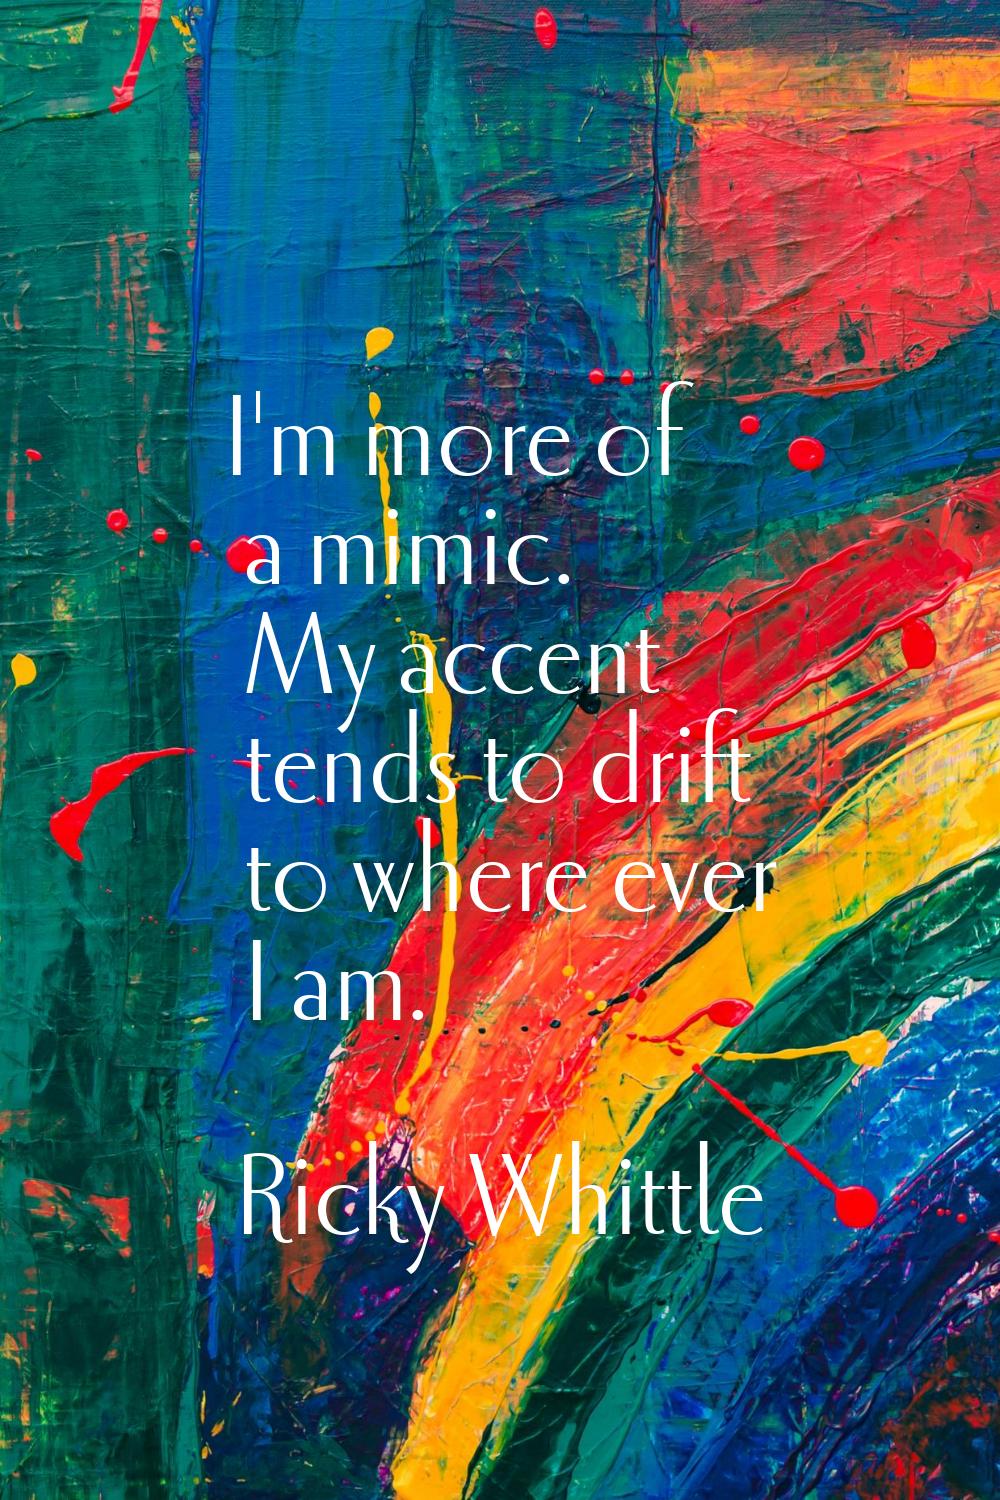 I'm more of a mimic. My accent tends to drift to where ever I am.